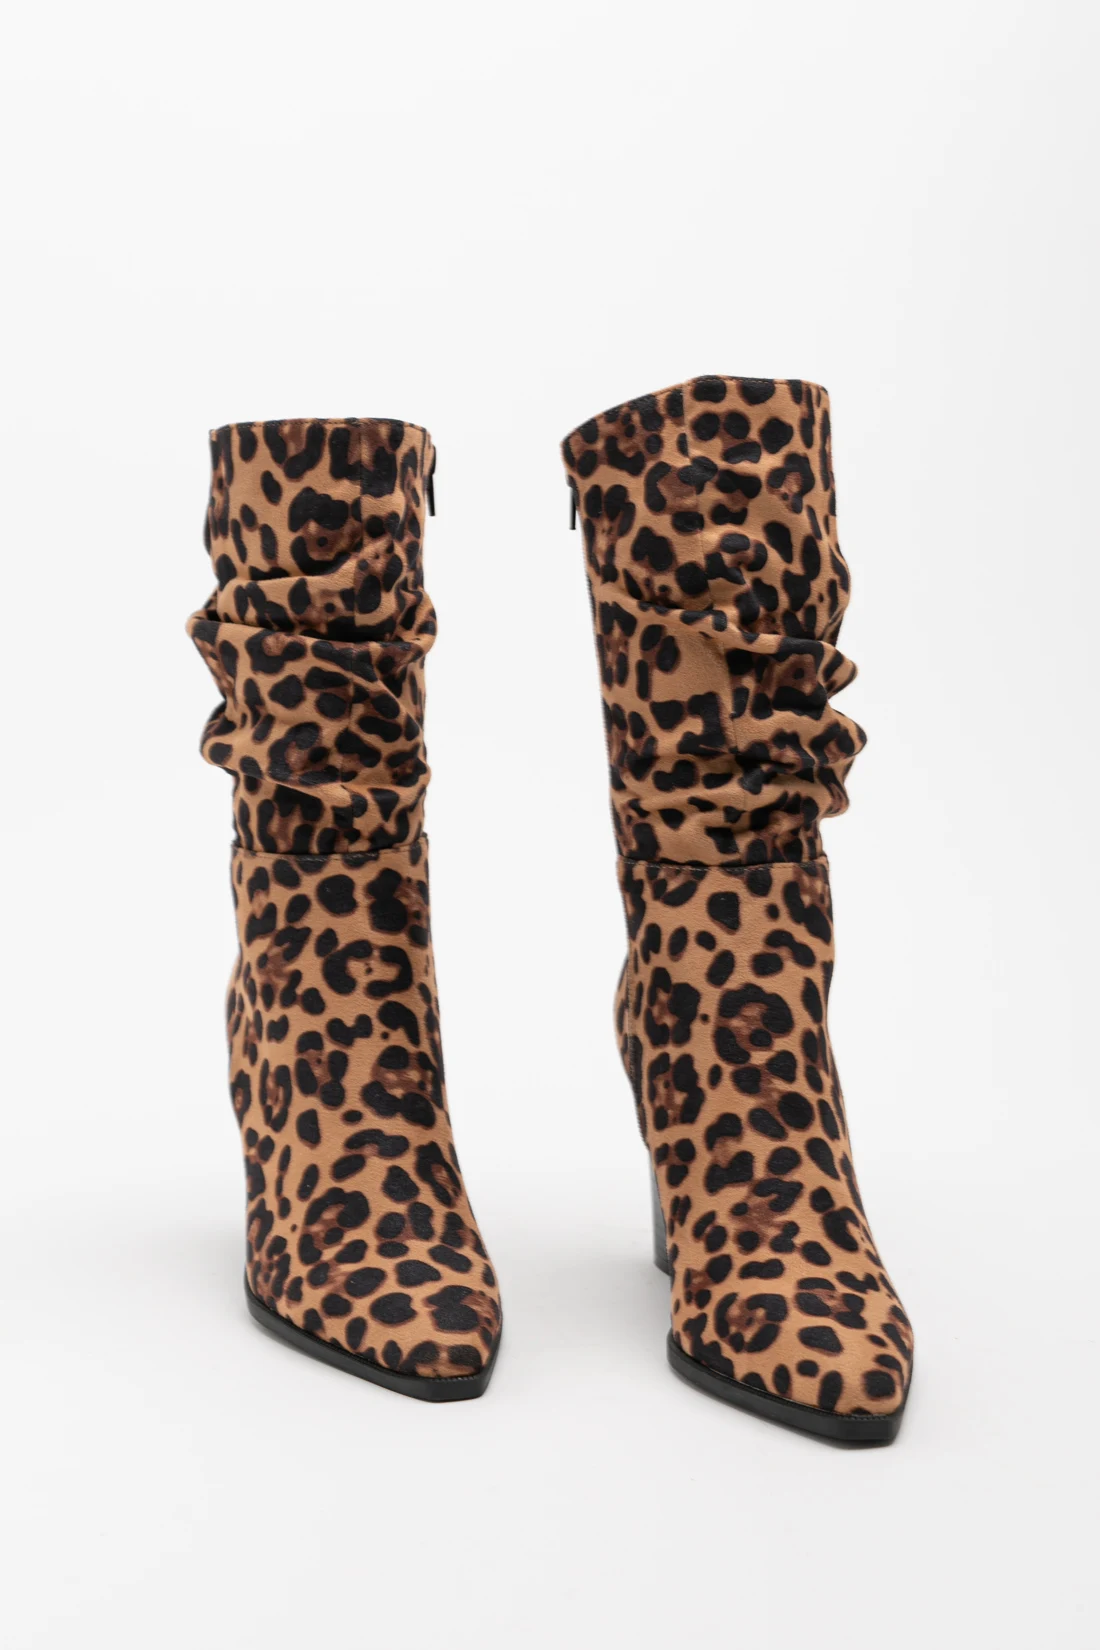 TOMODE BOOT - LEOPARD